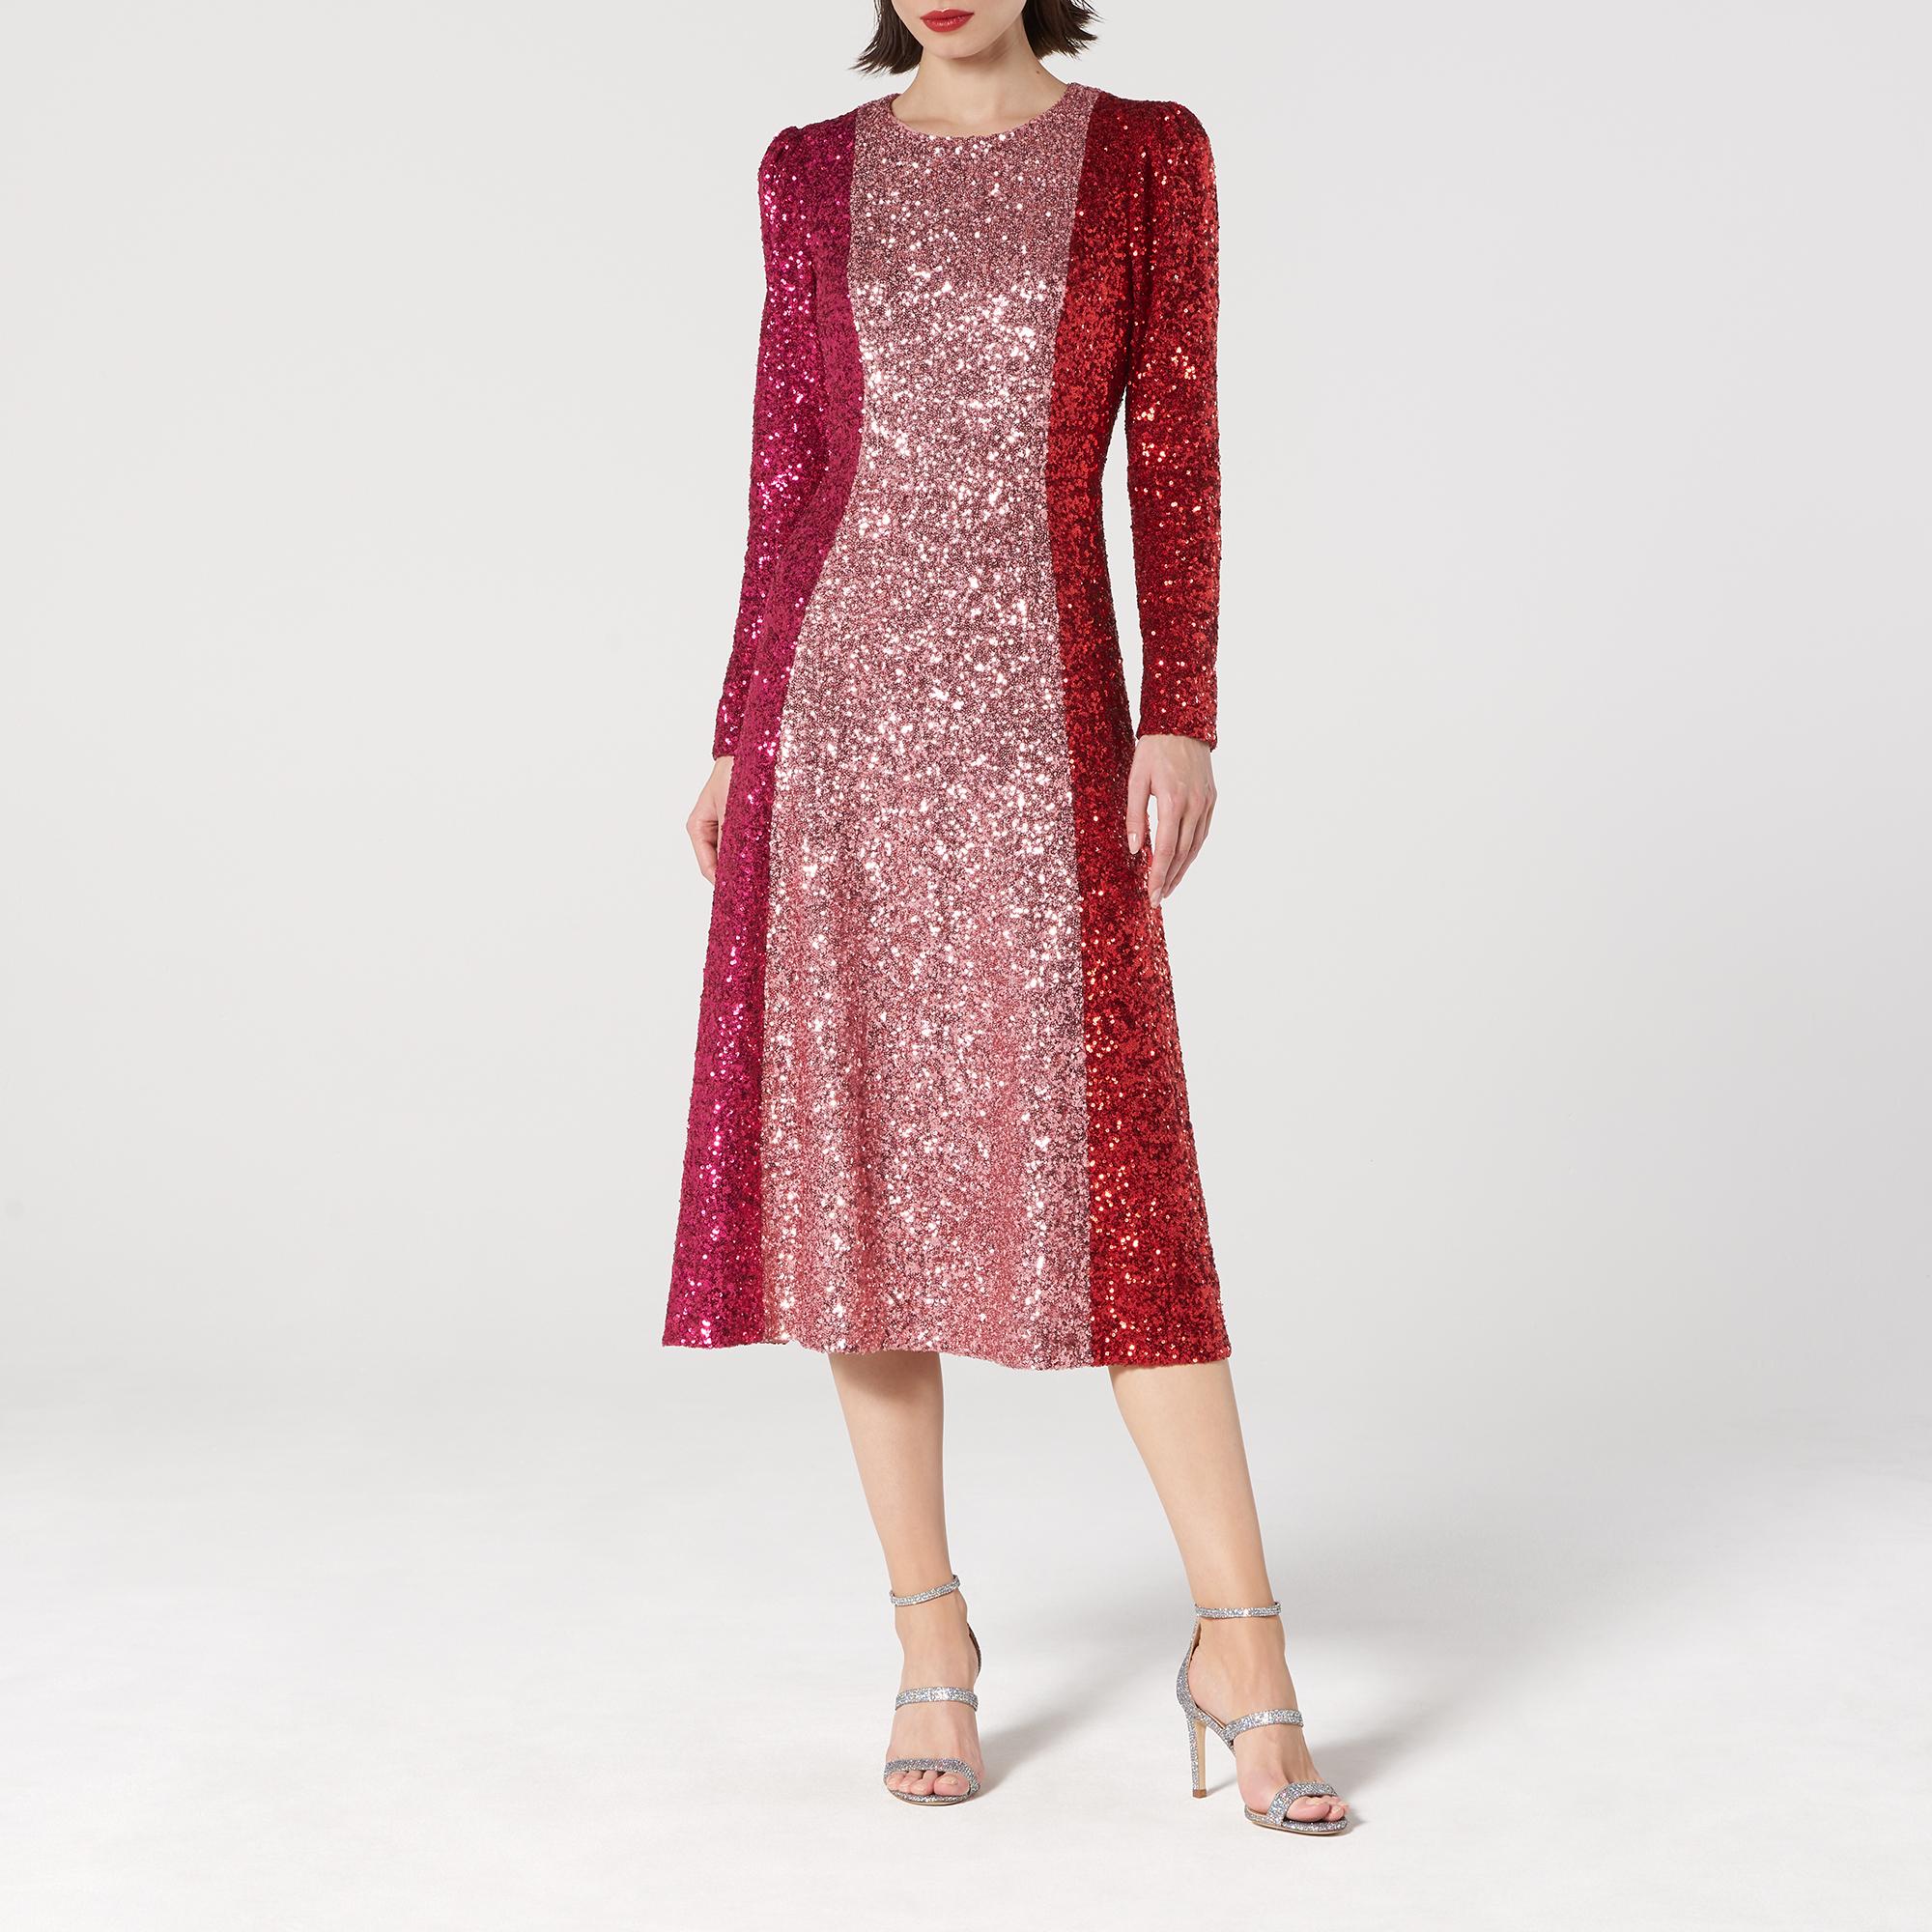 Fitzgeral Multi Sequin Dress | Clothing ...